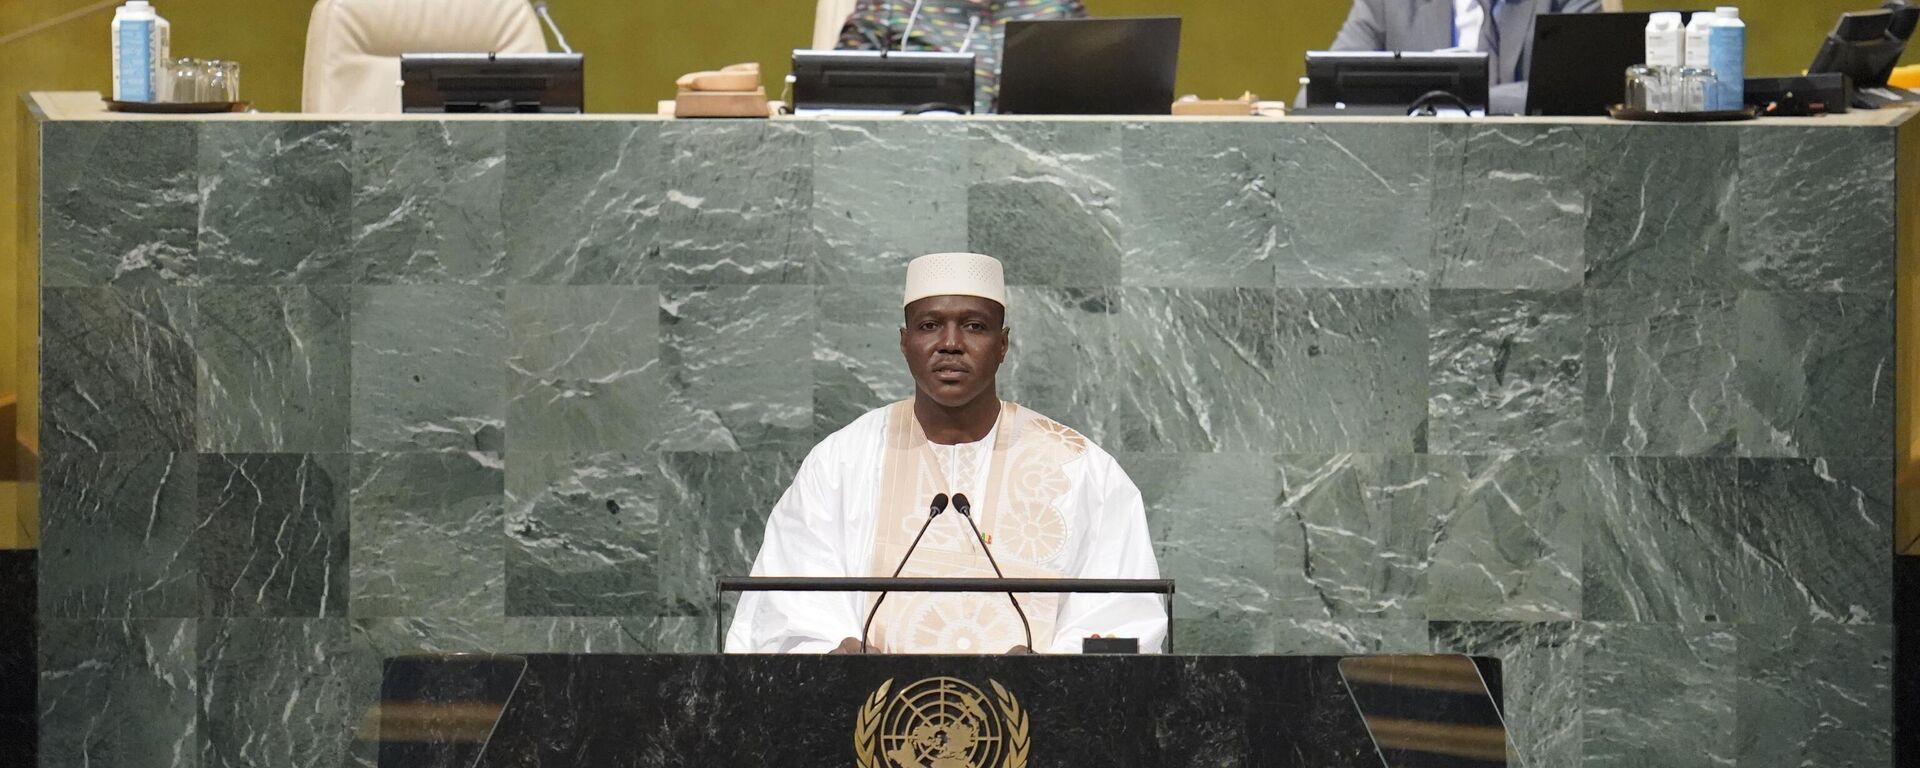 Acting Prime Minister of Mali Abdoulaye Maiga addresses the 77th session of the United Nations General Assembly, Saturday, Sept. 24, 2022 at U.N. headquarters - Sputnik International, 1920, 03.03.2023